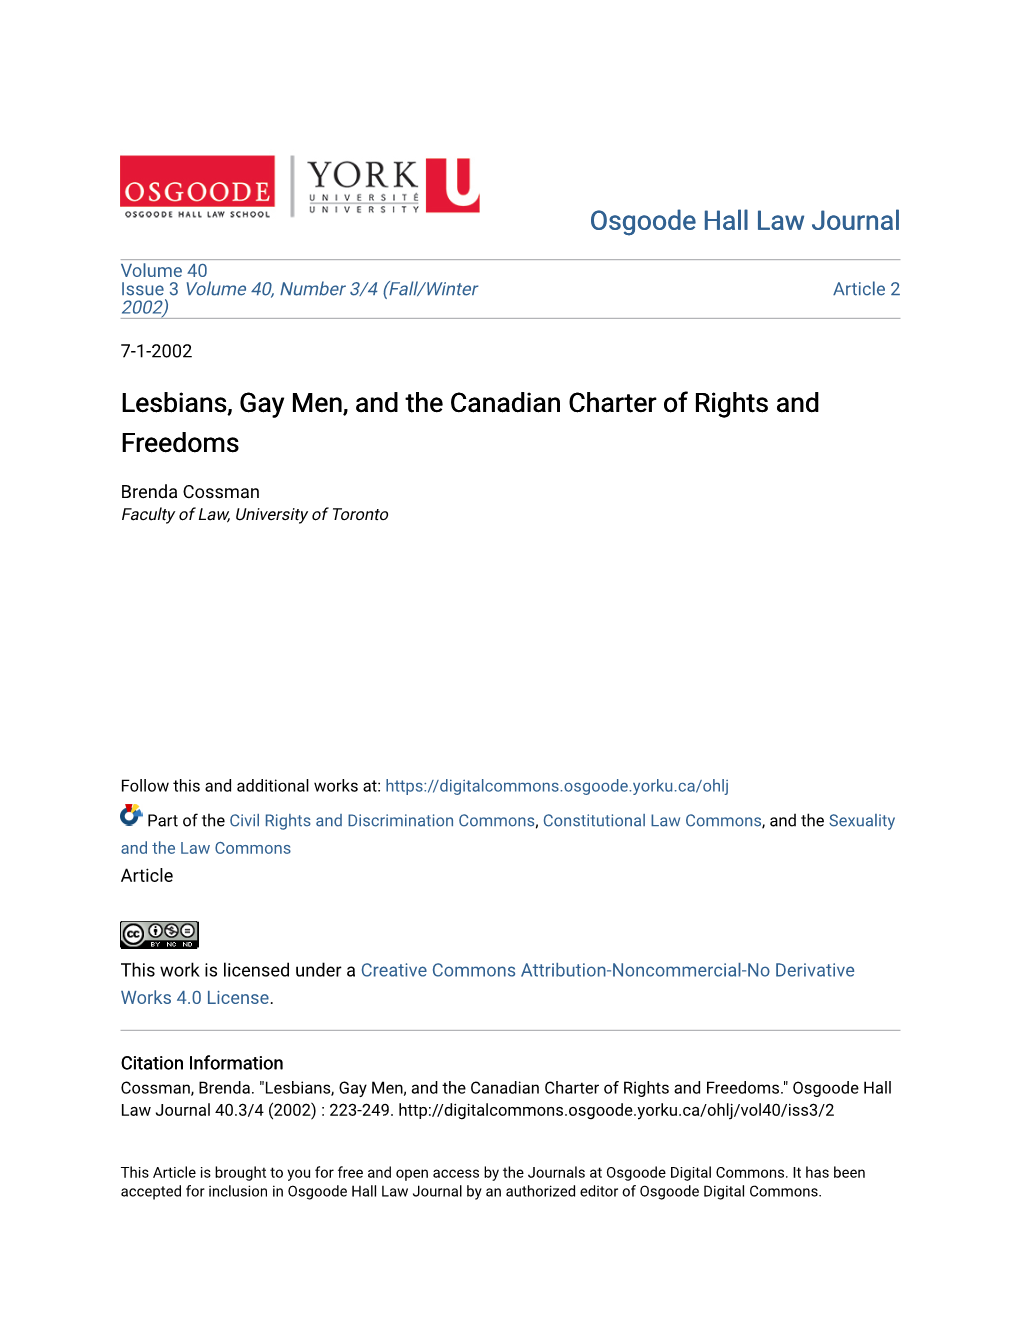 Lesbians, Gay Men, and the Canadian Charter of Rights and Freedoms